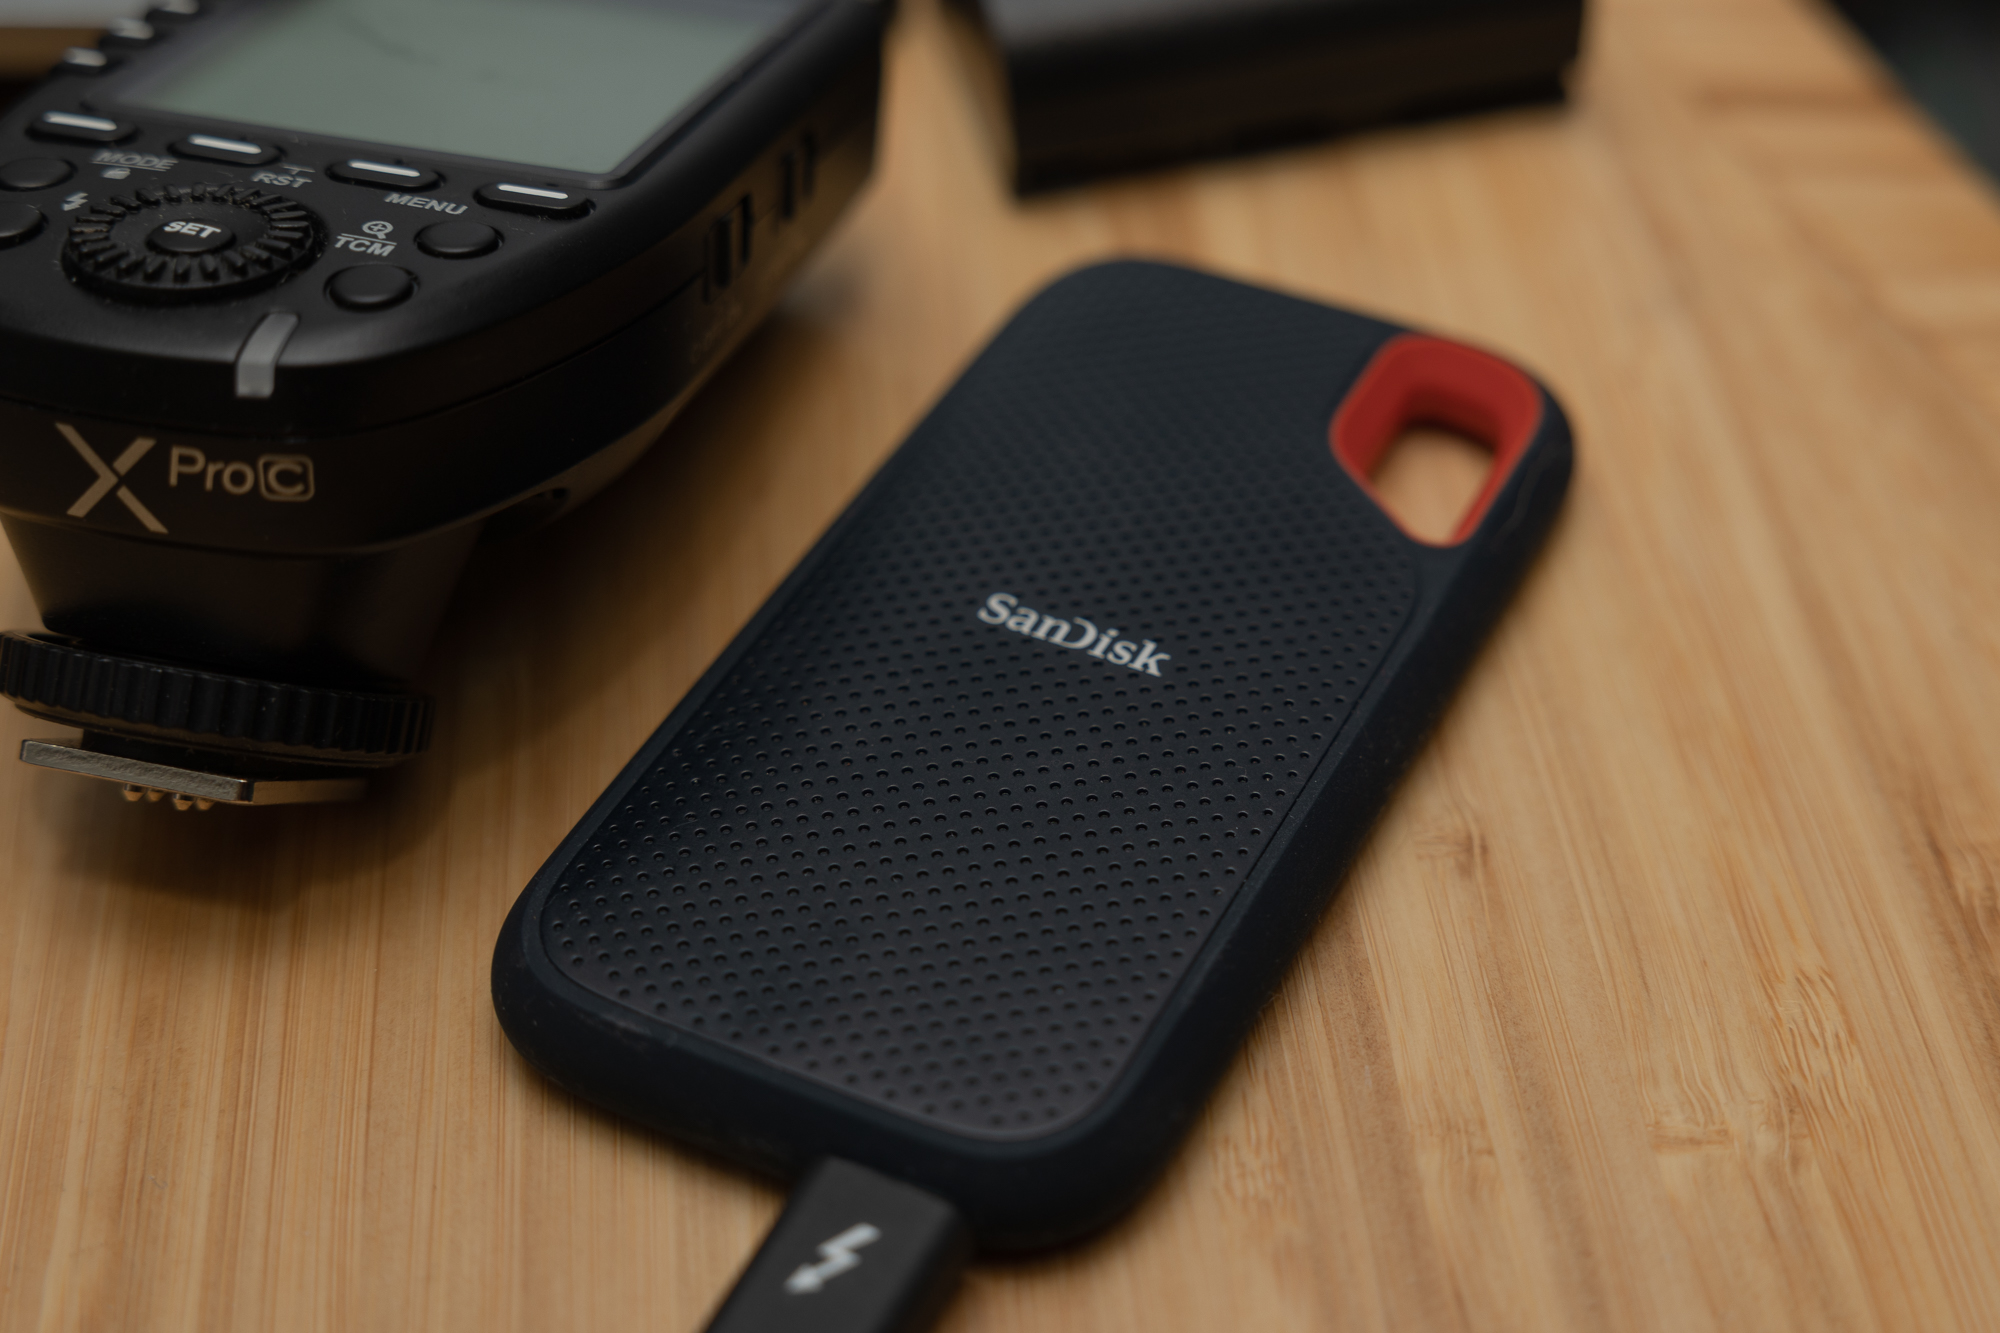 SanDisk Extreme Pro Portable SSD Review